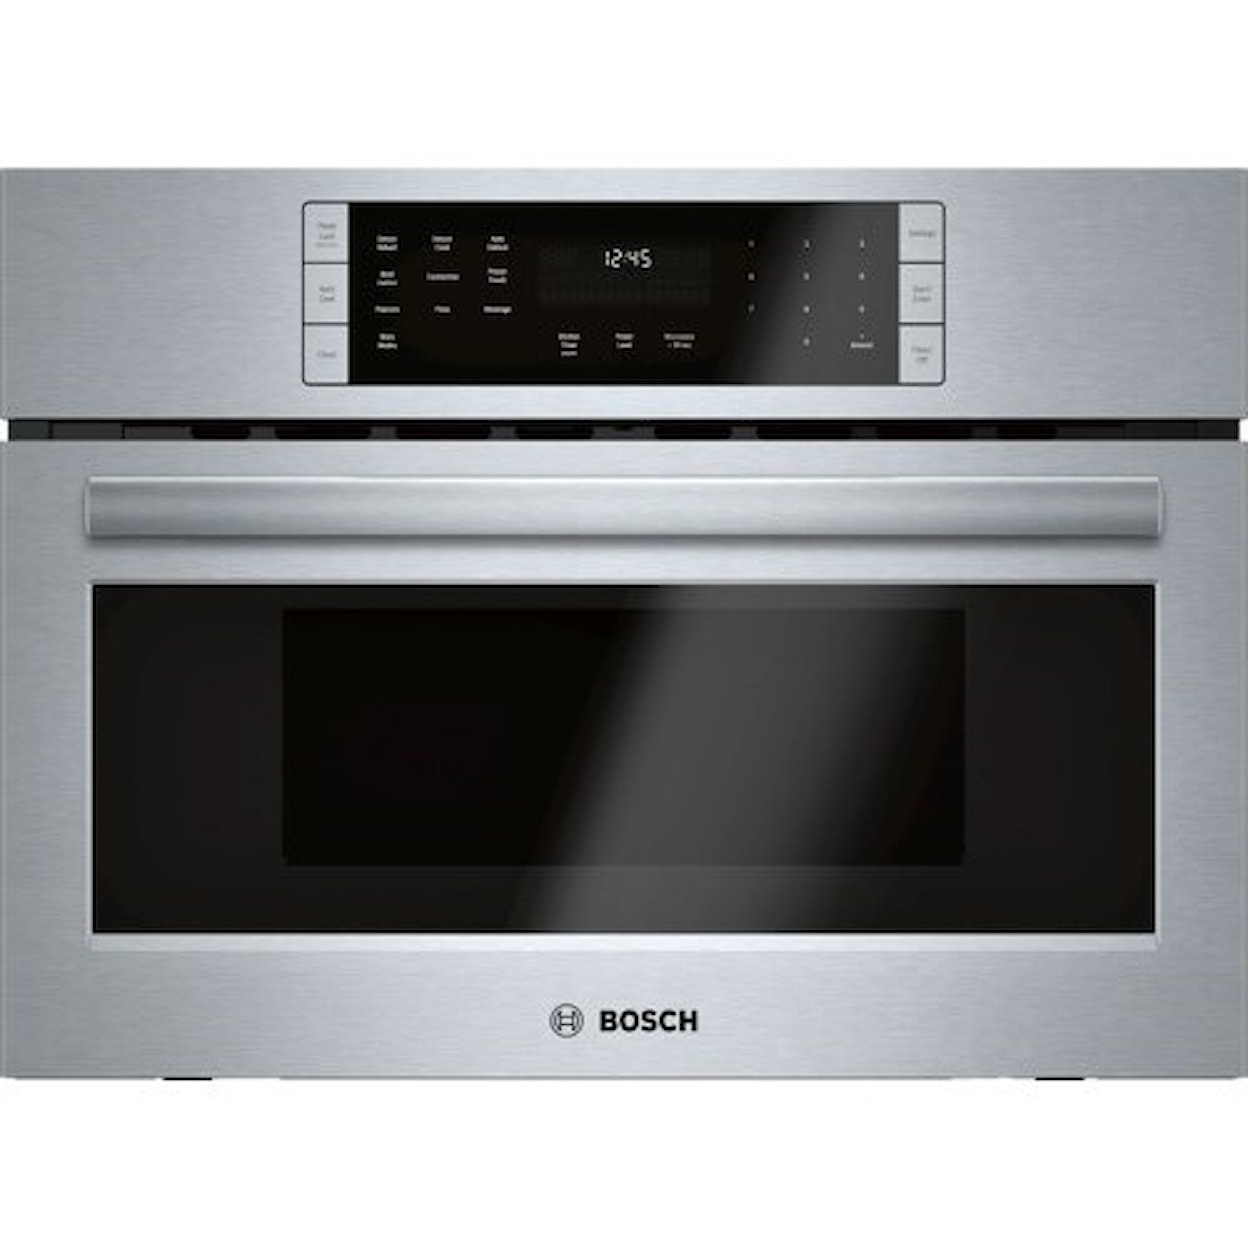 Bosch Microwaves 27" Speed Microwave Oven - 800 Series